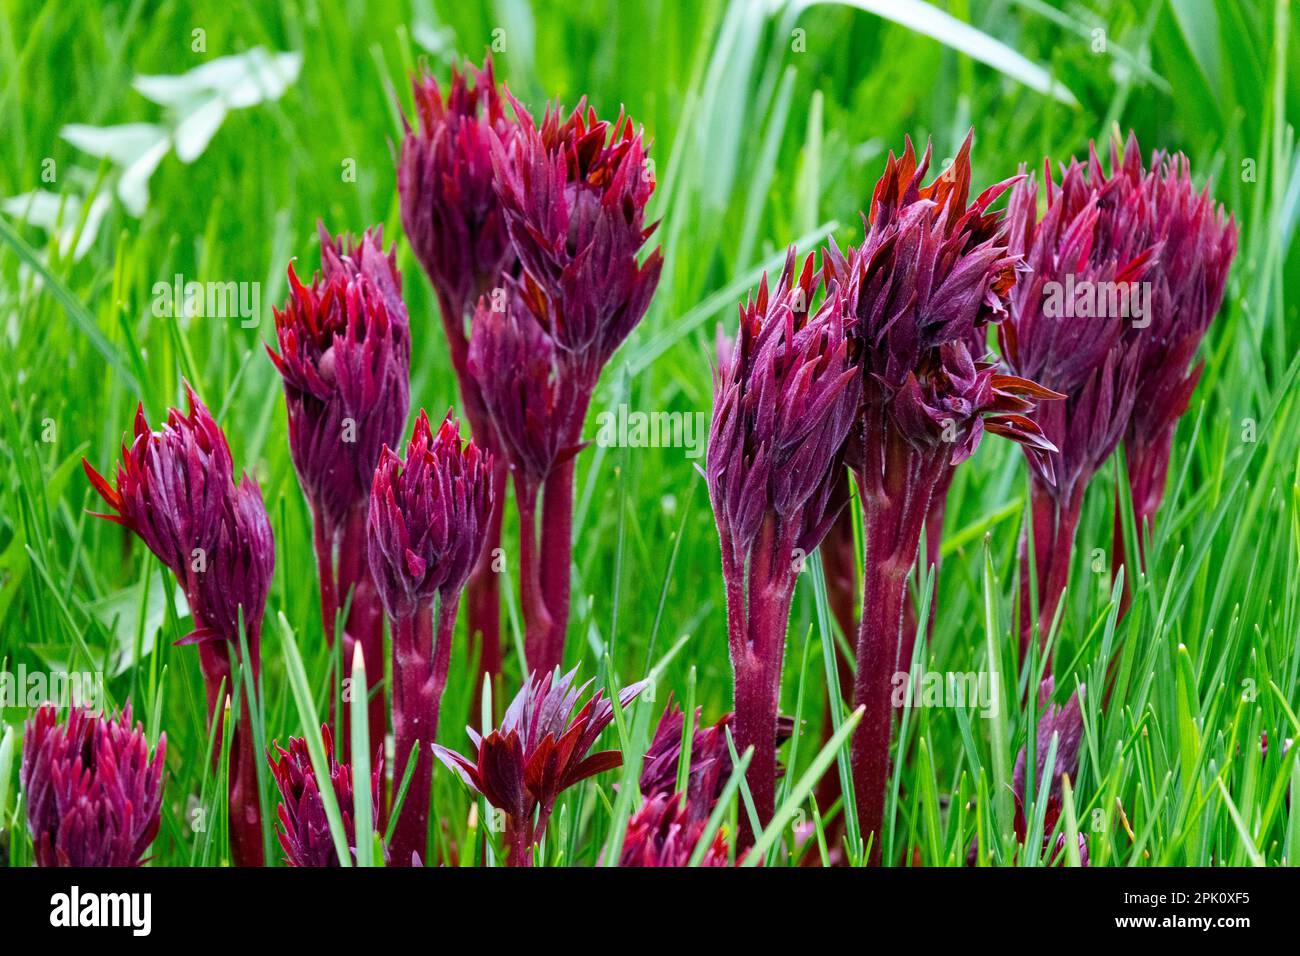 Spring Shoots Green Red Peony April New shoots Growing in Grass Springtime Garden Season Paeonia shoots Peonies Budding Early spring Plants Growth Stock Photo